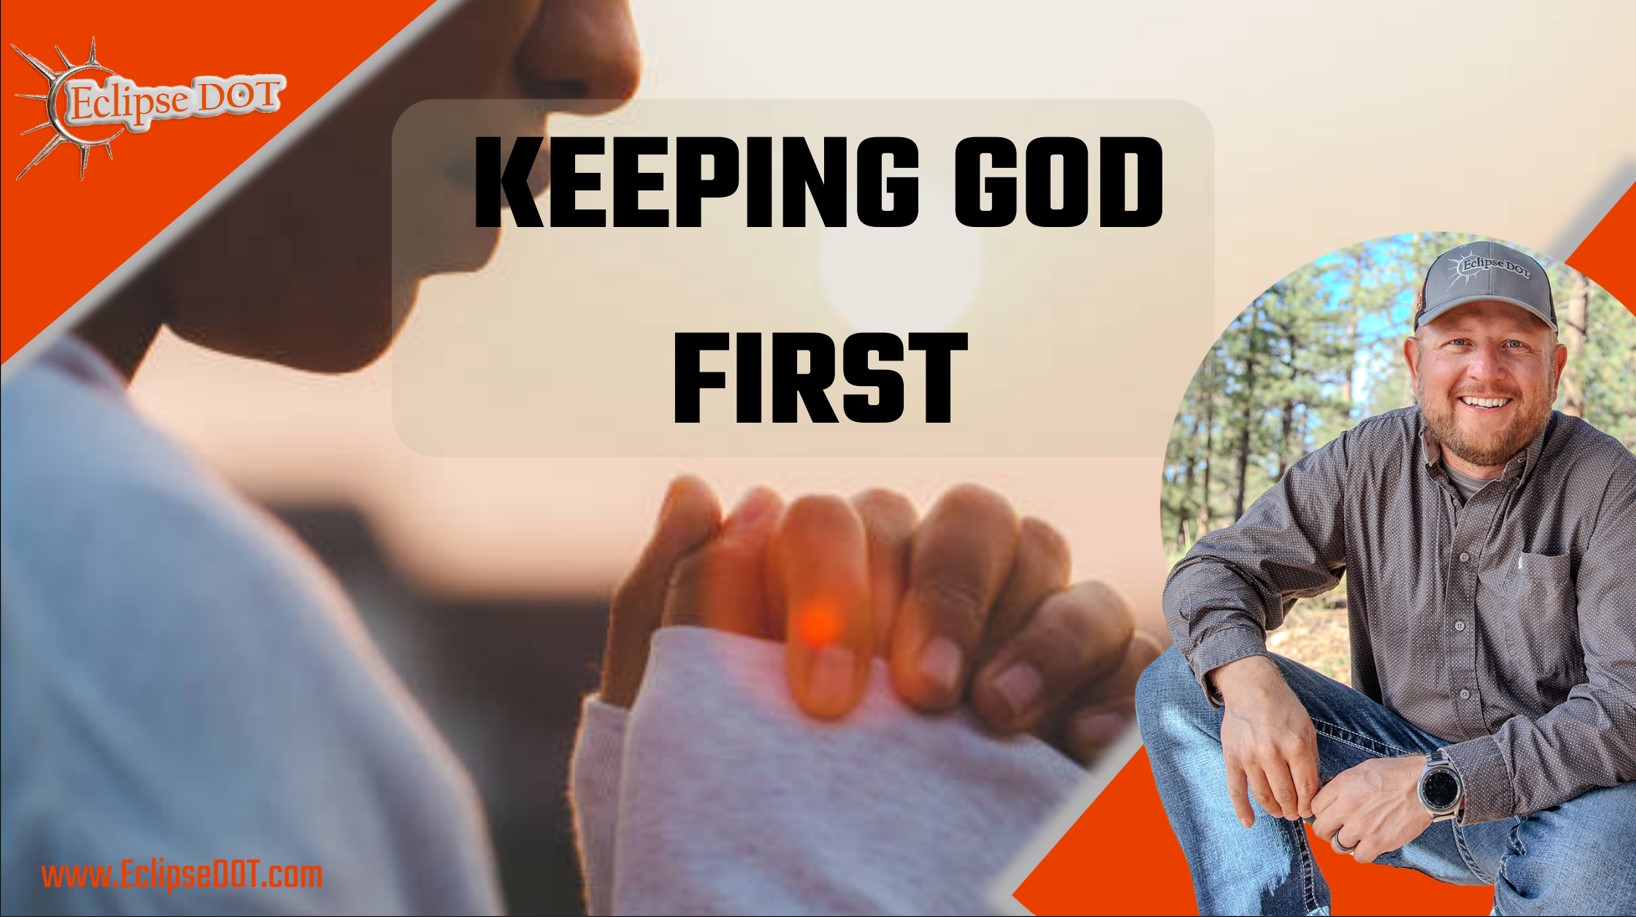 Hands folded in prayer, symbolizing the concept of keeping God first.